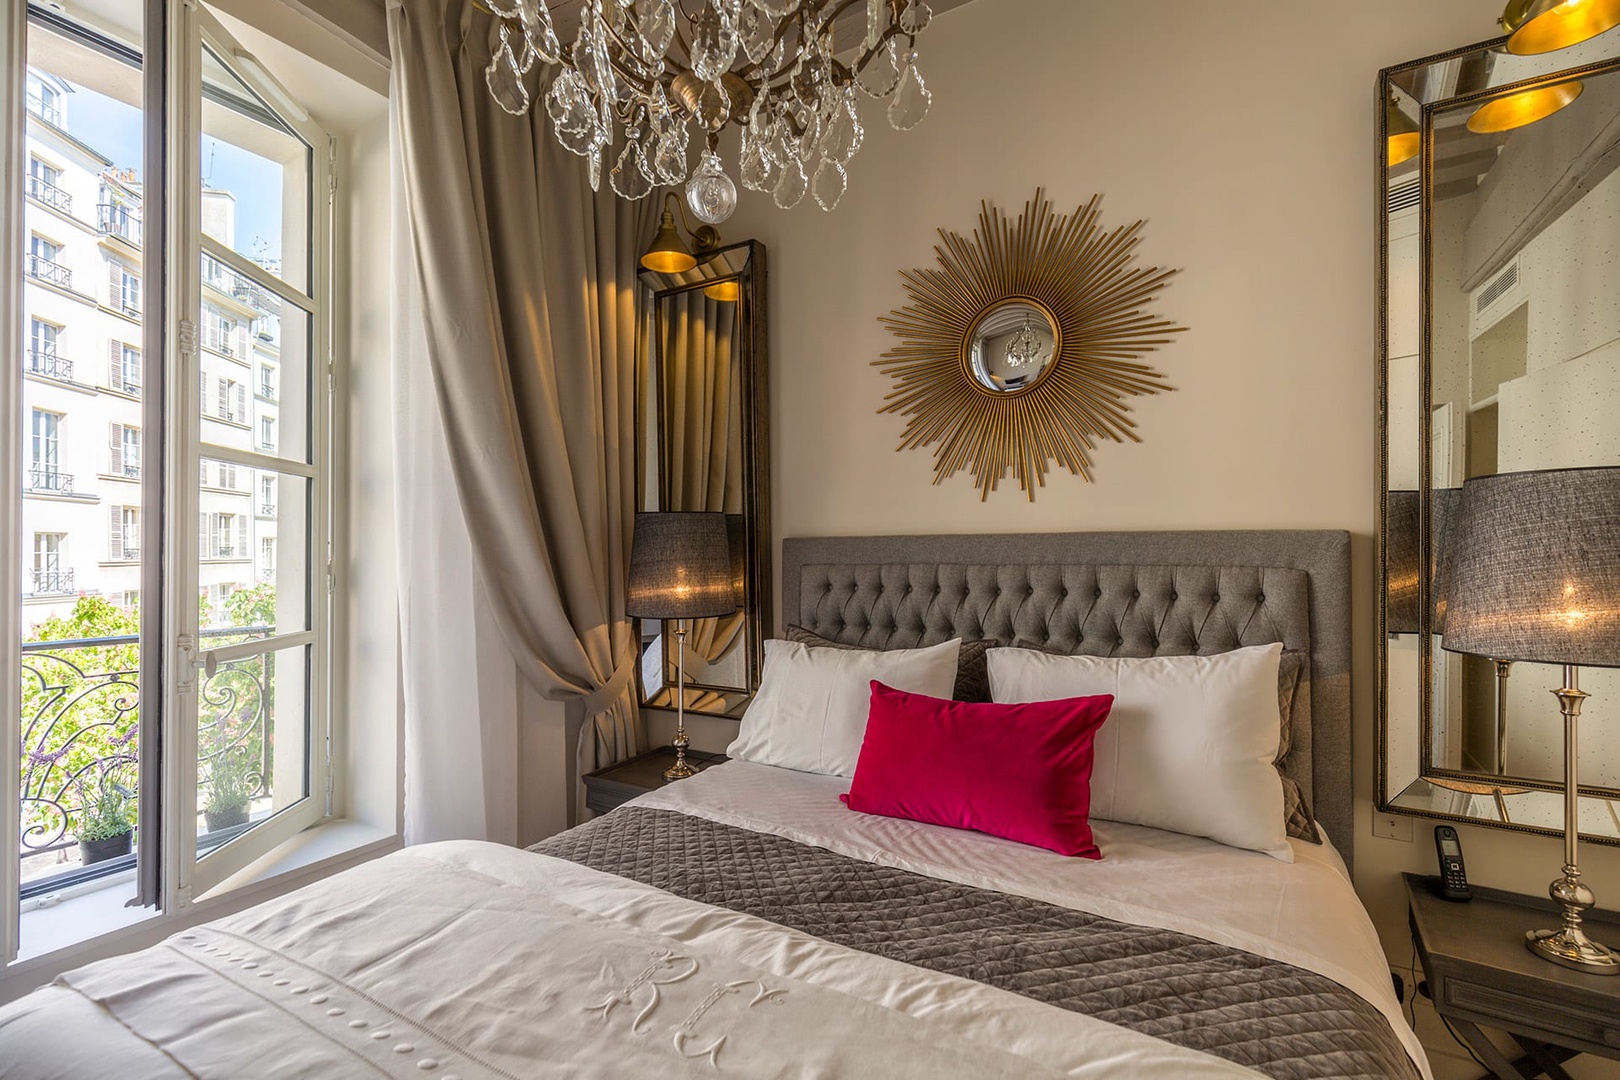 Feel at home in the beautiful bedroom with a sumptuous bed.